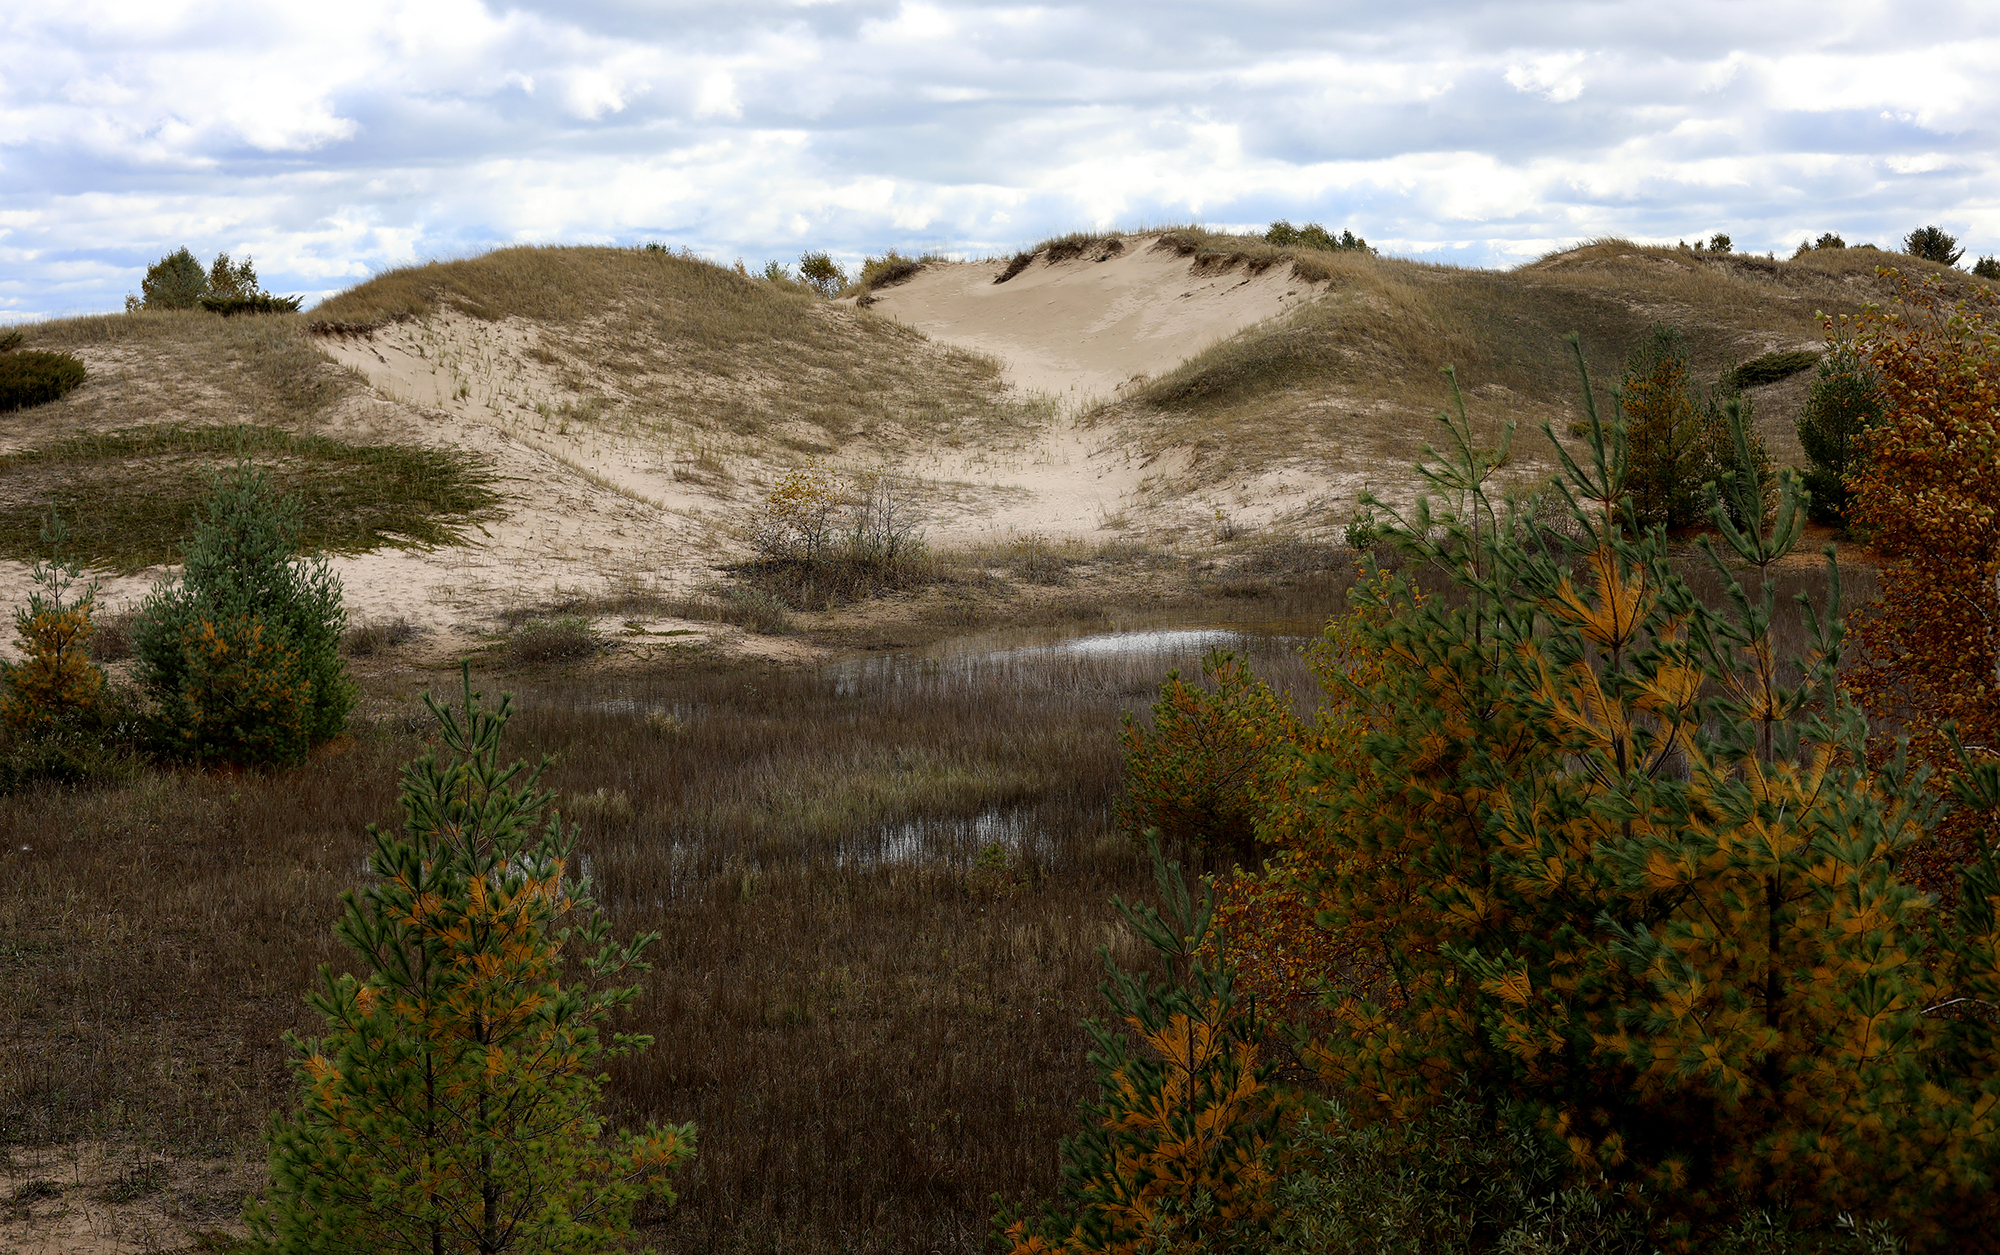 Sand dunes are seen at Kohler-Andrae State Park